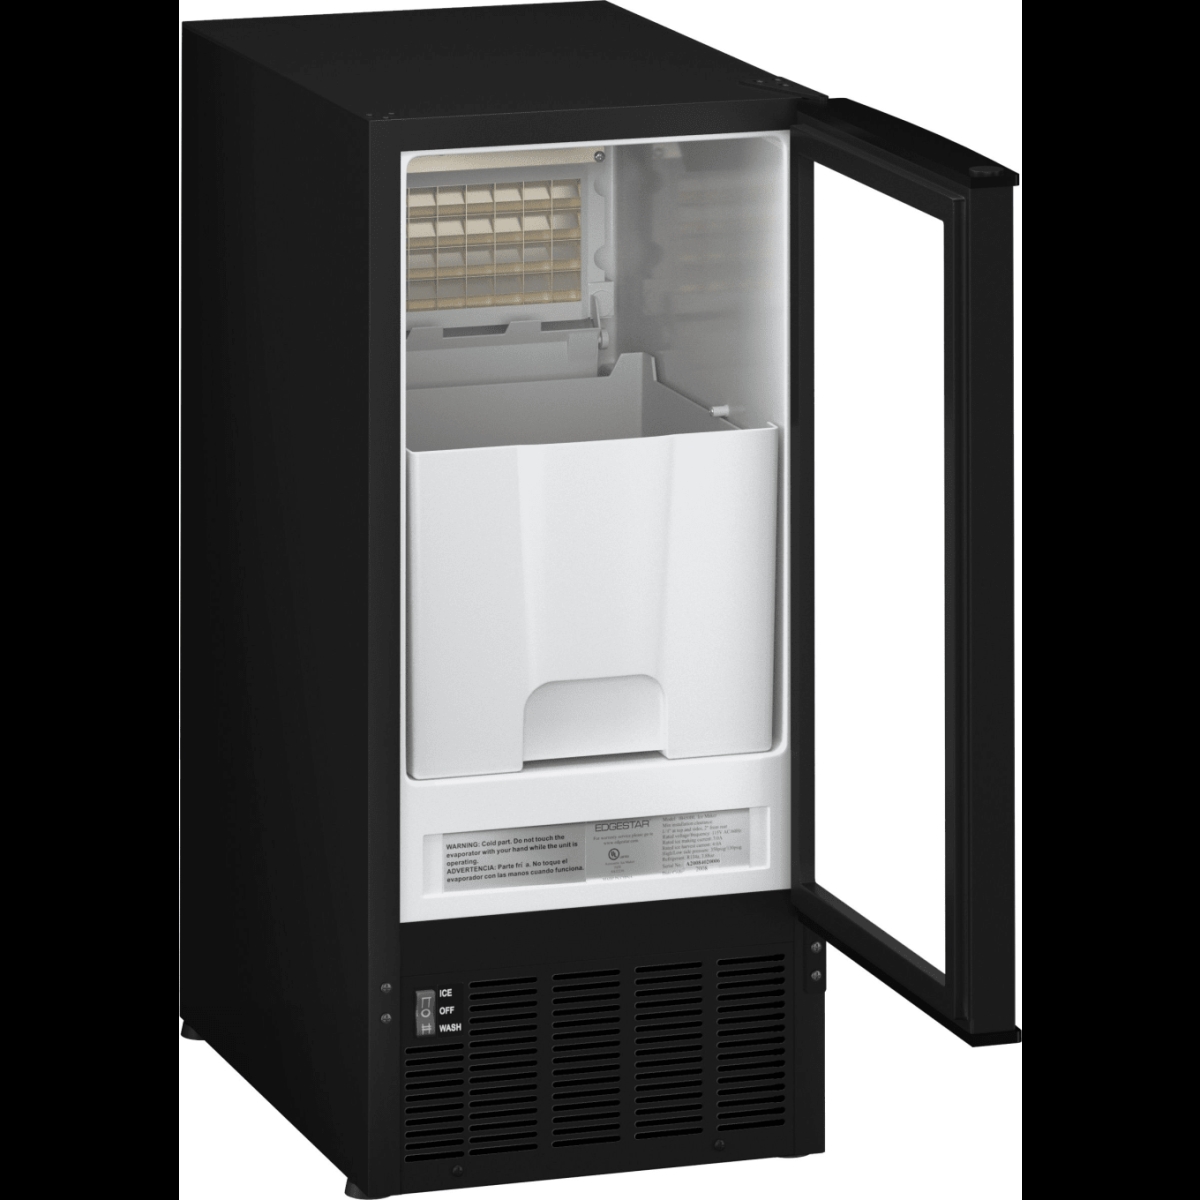 Picture of EdgeStar IB450BL 15 in. Wide 25 lbs Capacity Built-in Ice Maker with 50 lbs Daily Ice Production, Black